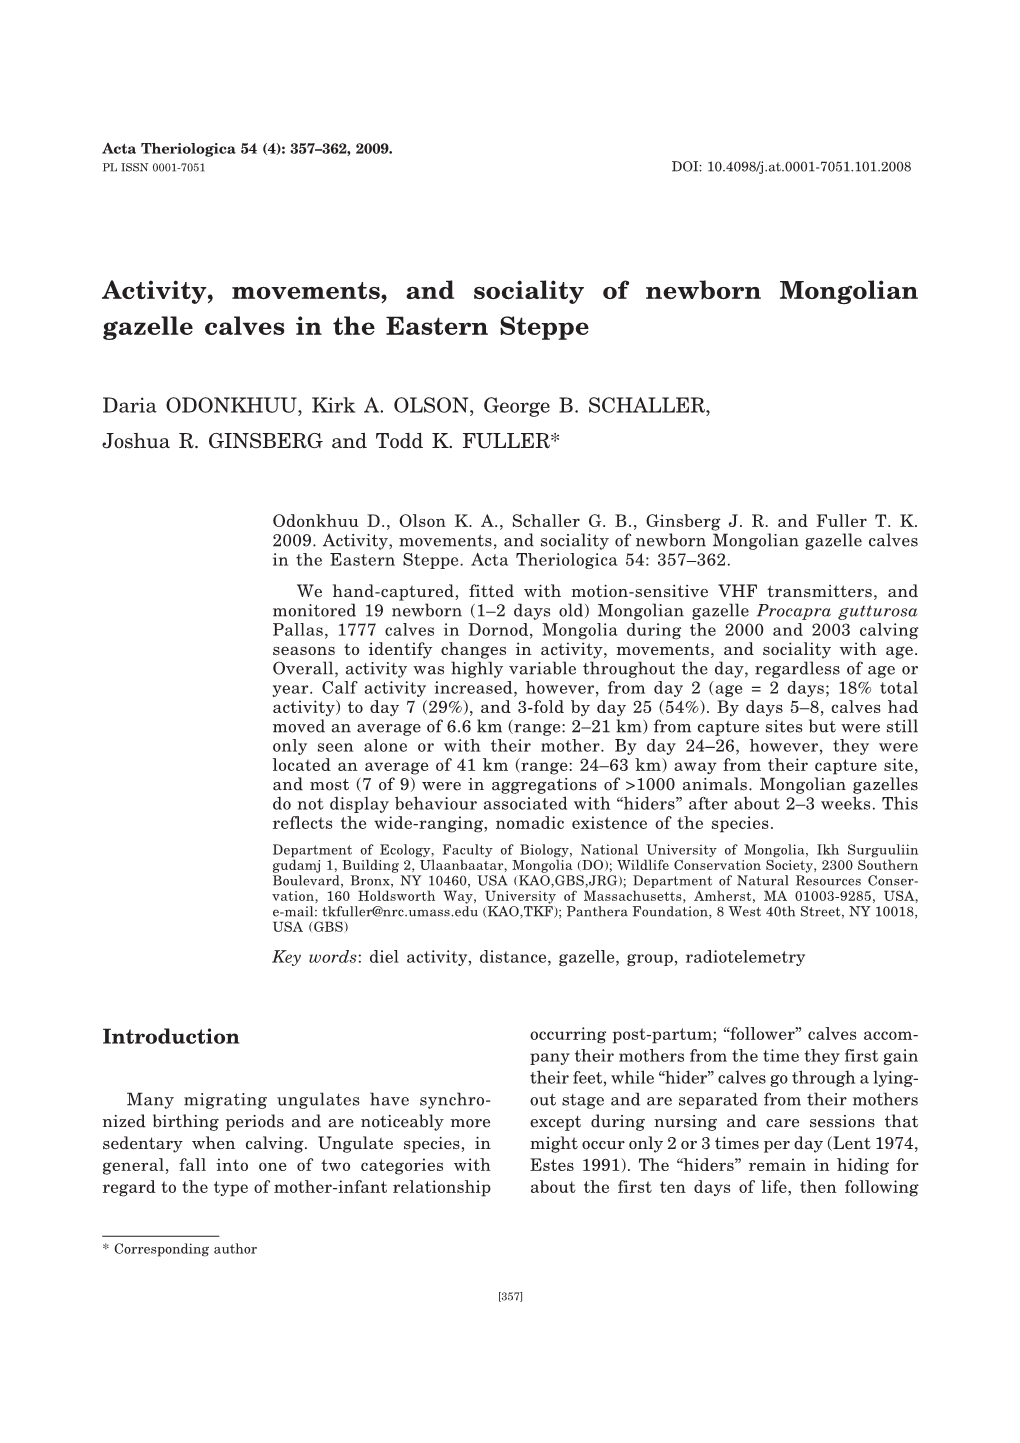 Activity, Movements, and Sociality of Newborn Mongolian Gazelle Calves in the Eastern Steppe